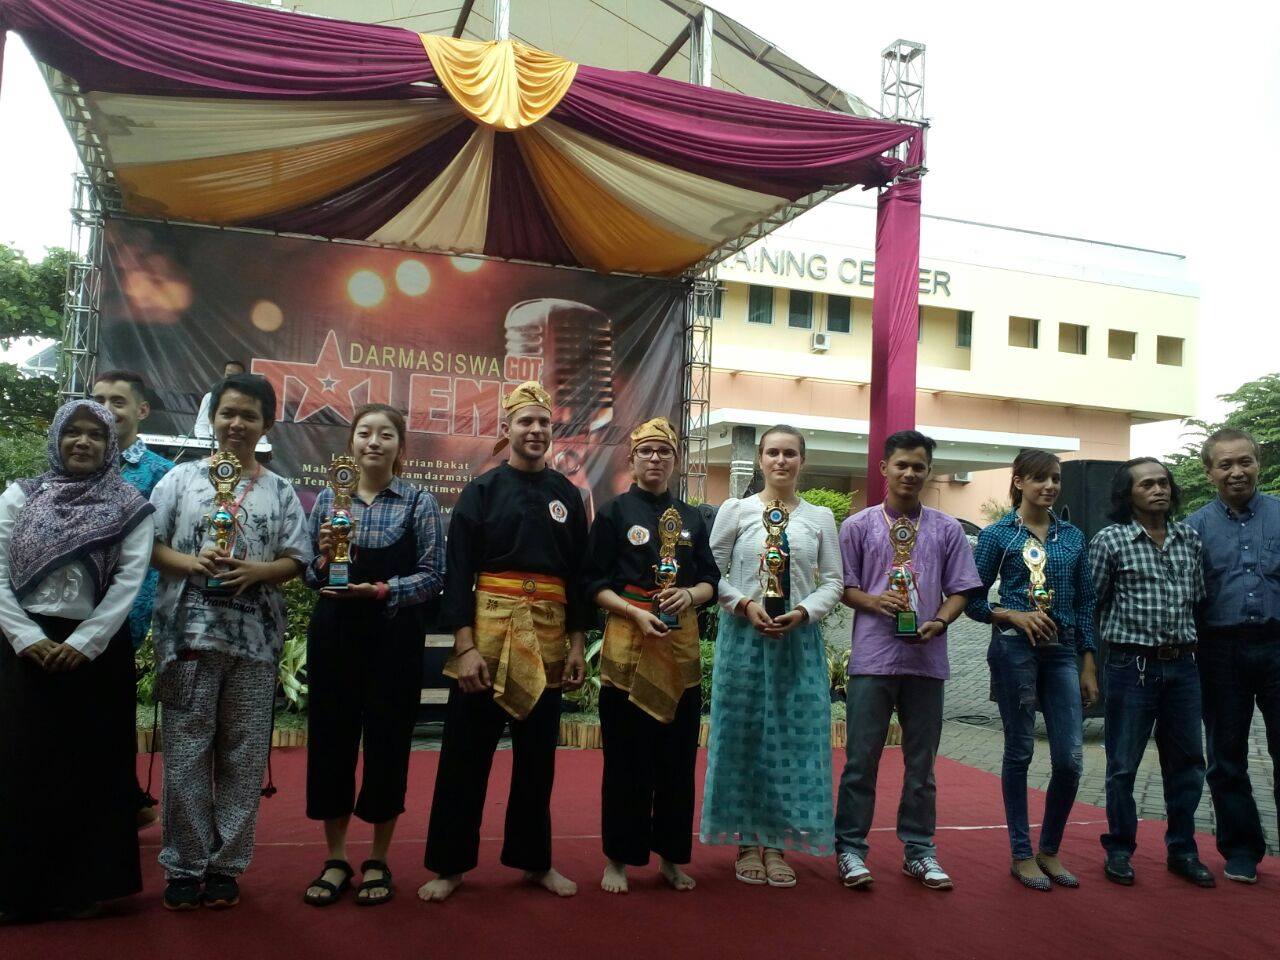 Darmasiswa UAD won the First place in Traditional Dancing Competition at Universitas Diponogoro